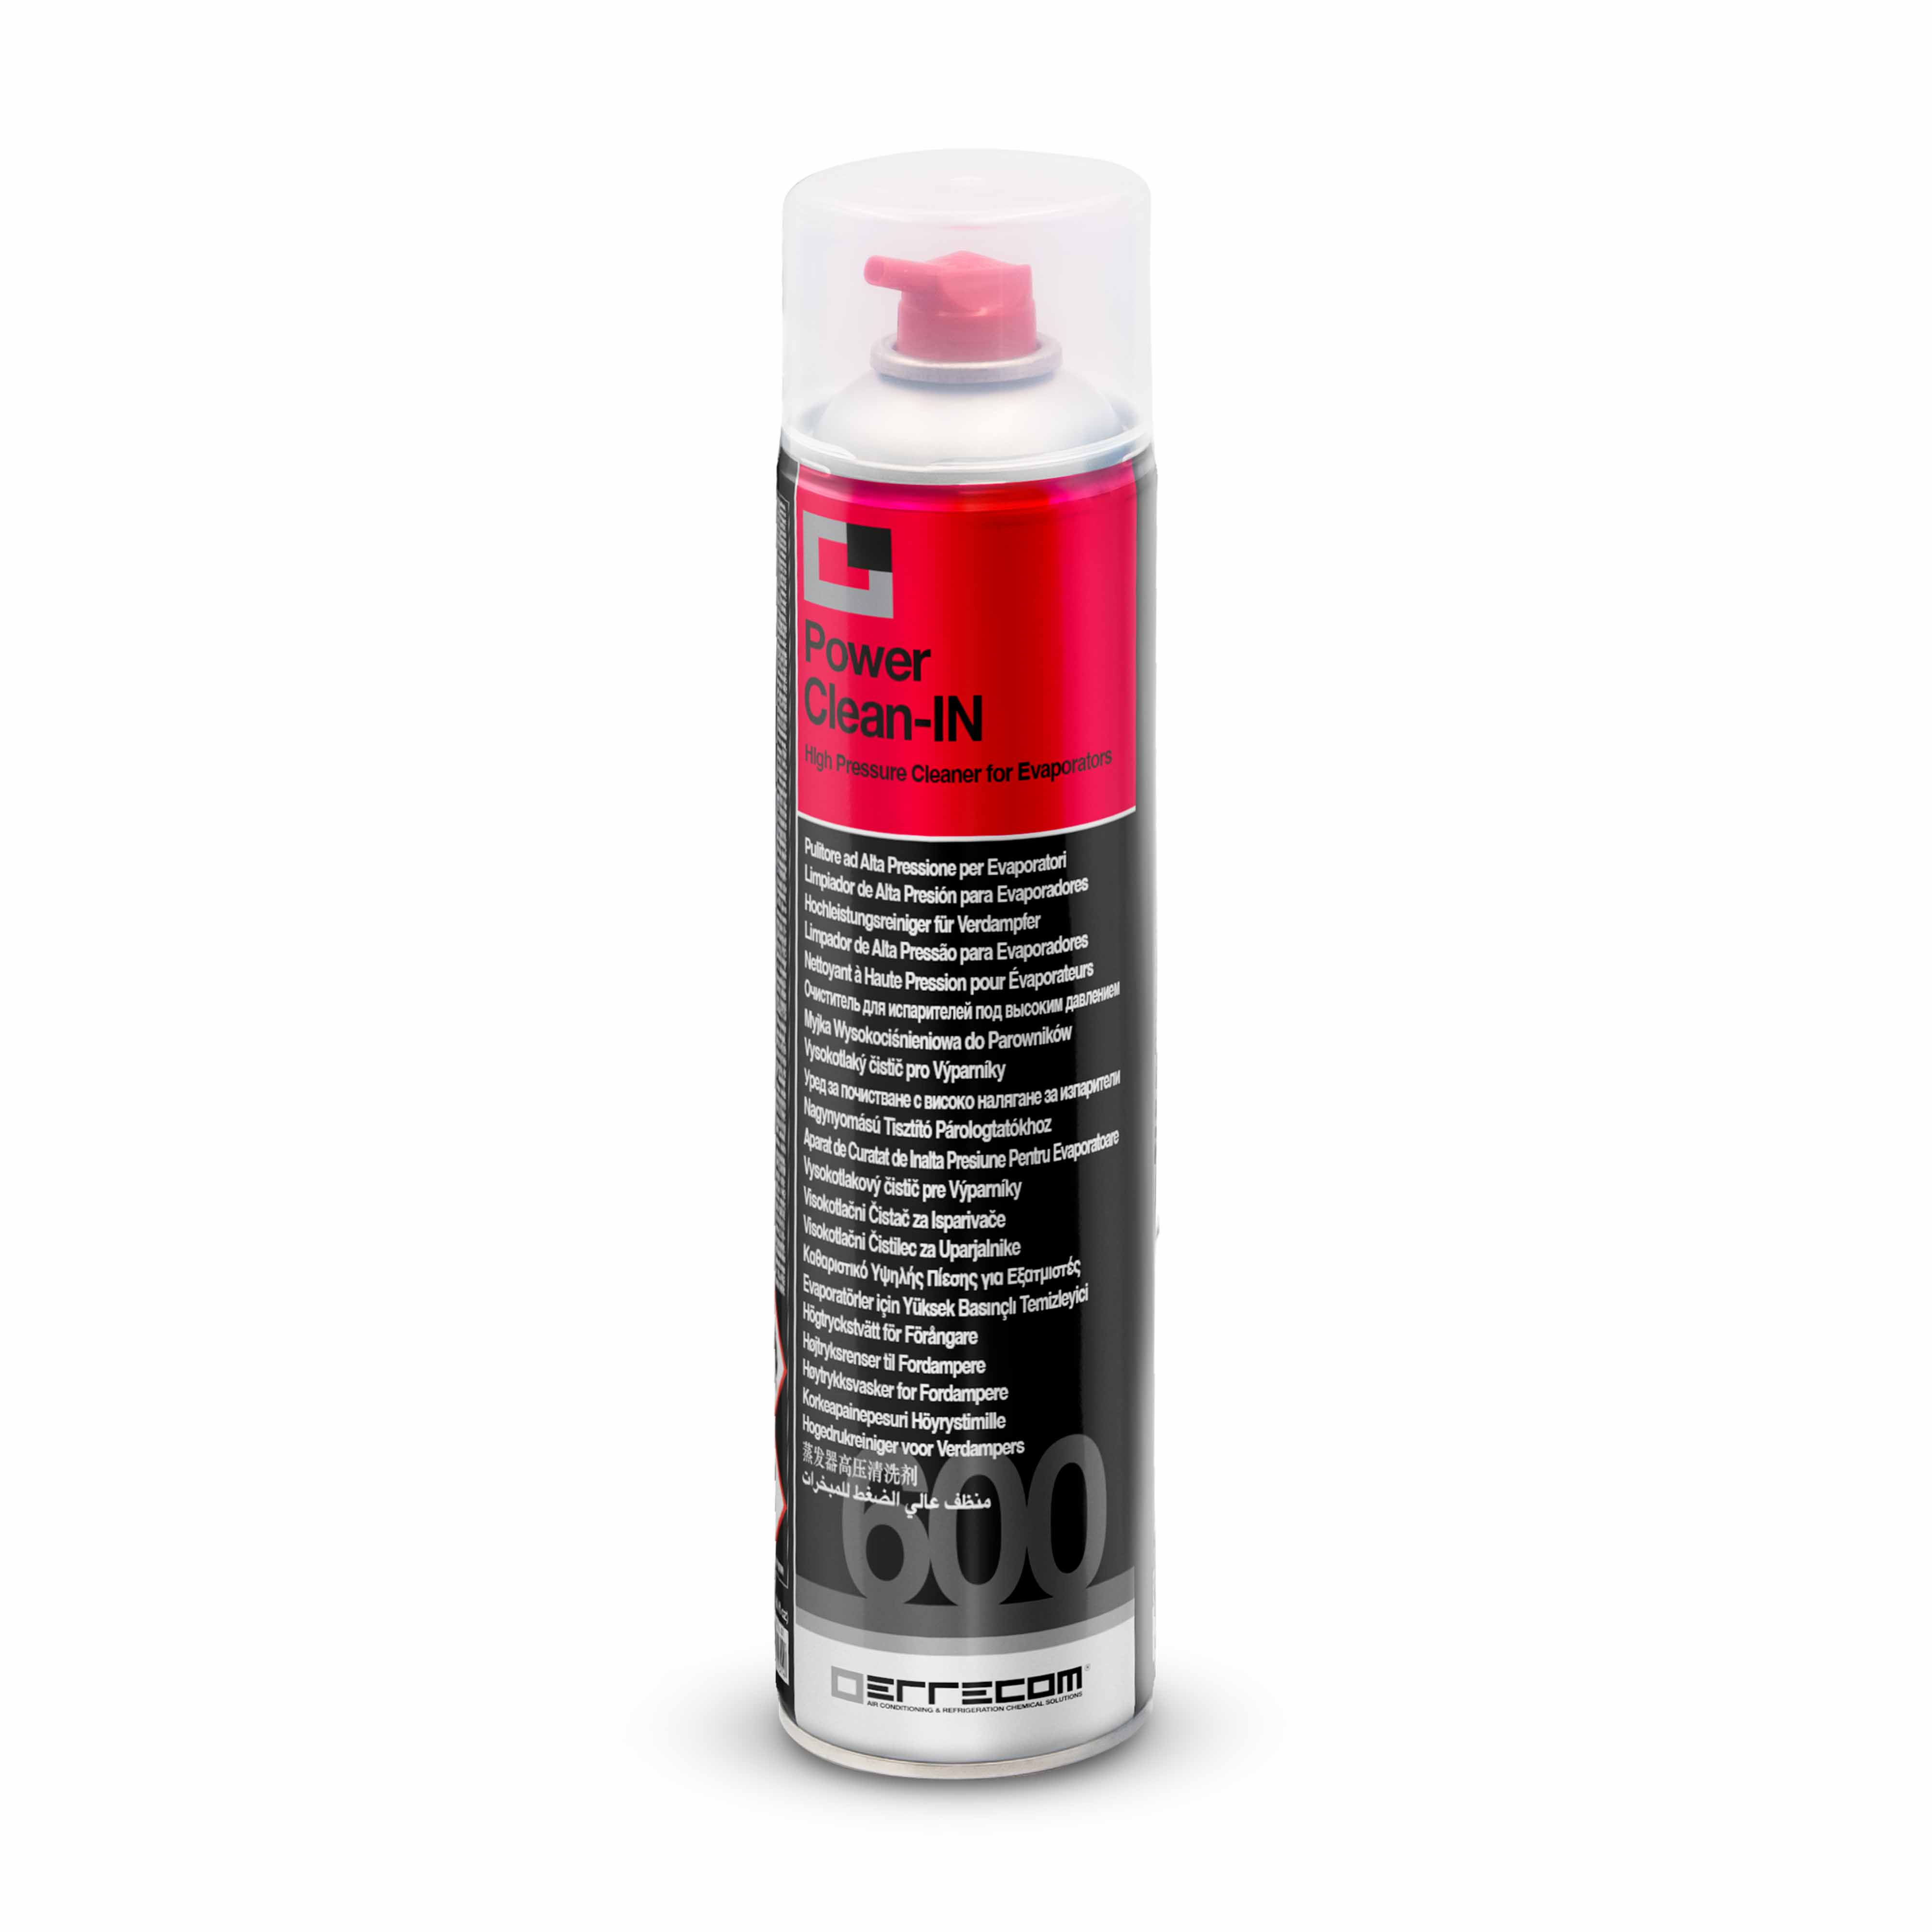 12 x High Pressure Cleaner for Evaporators and Condensers - POWER CLEAN IN - 600 ml - Package # 12 pcs.